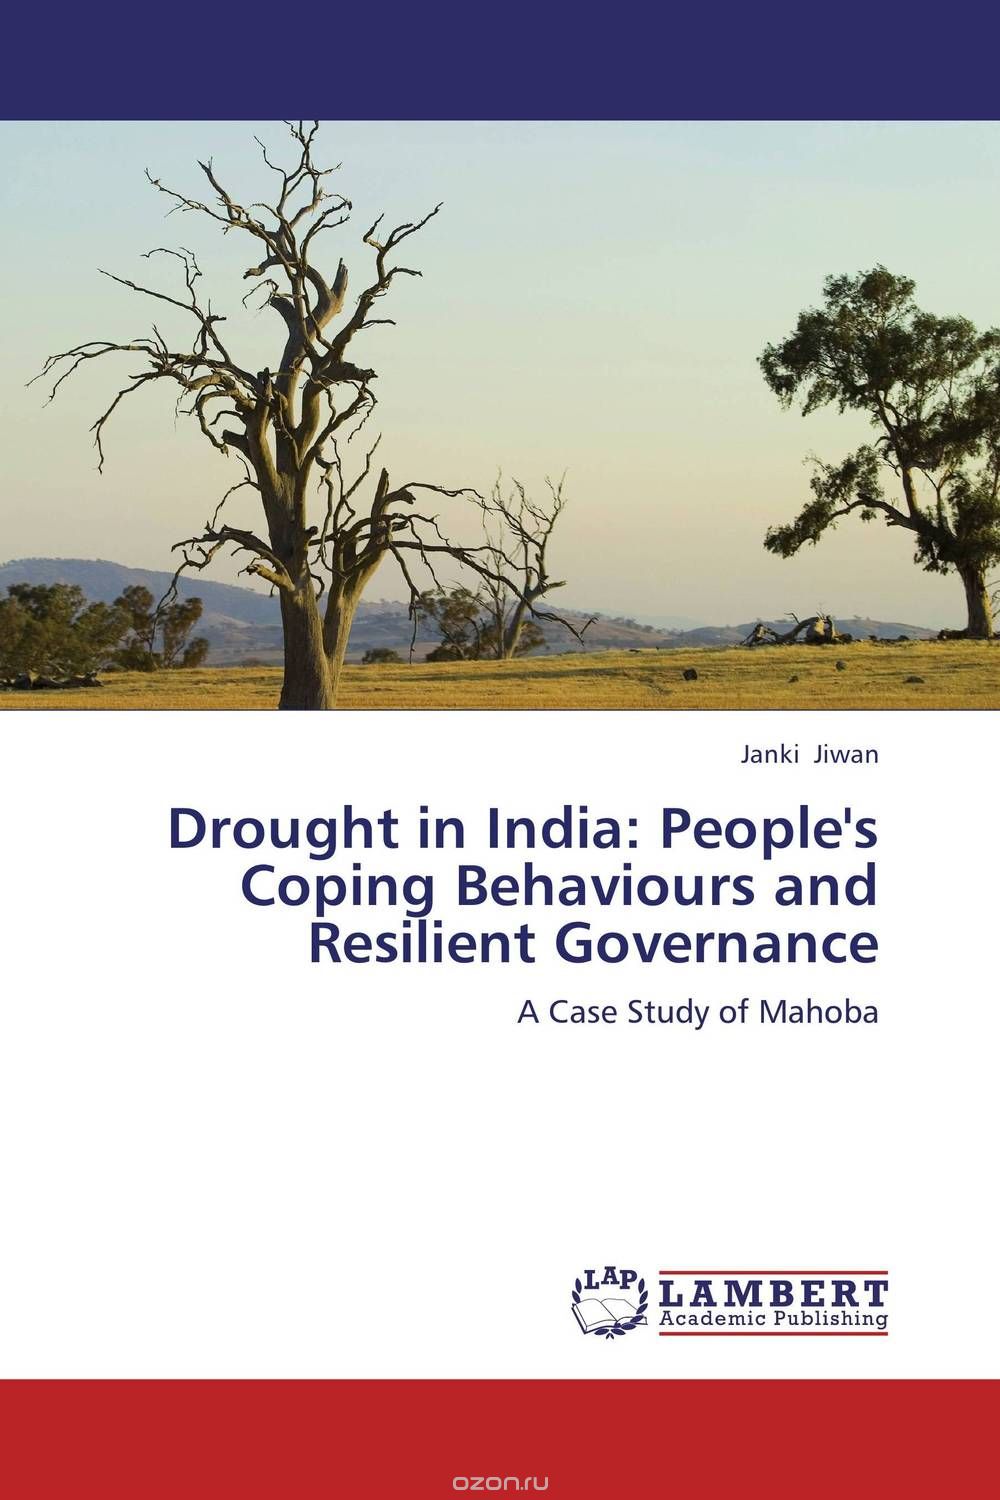 Скачать книгу "Drought in India: People's Coping Behaviours and Resilient Governance"